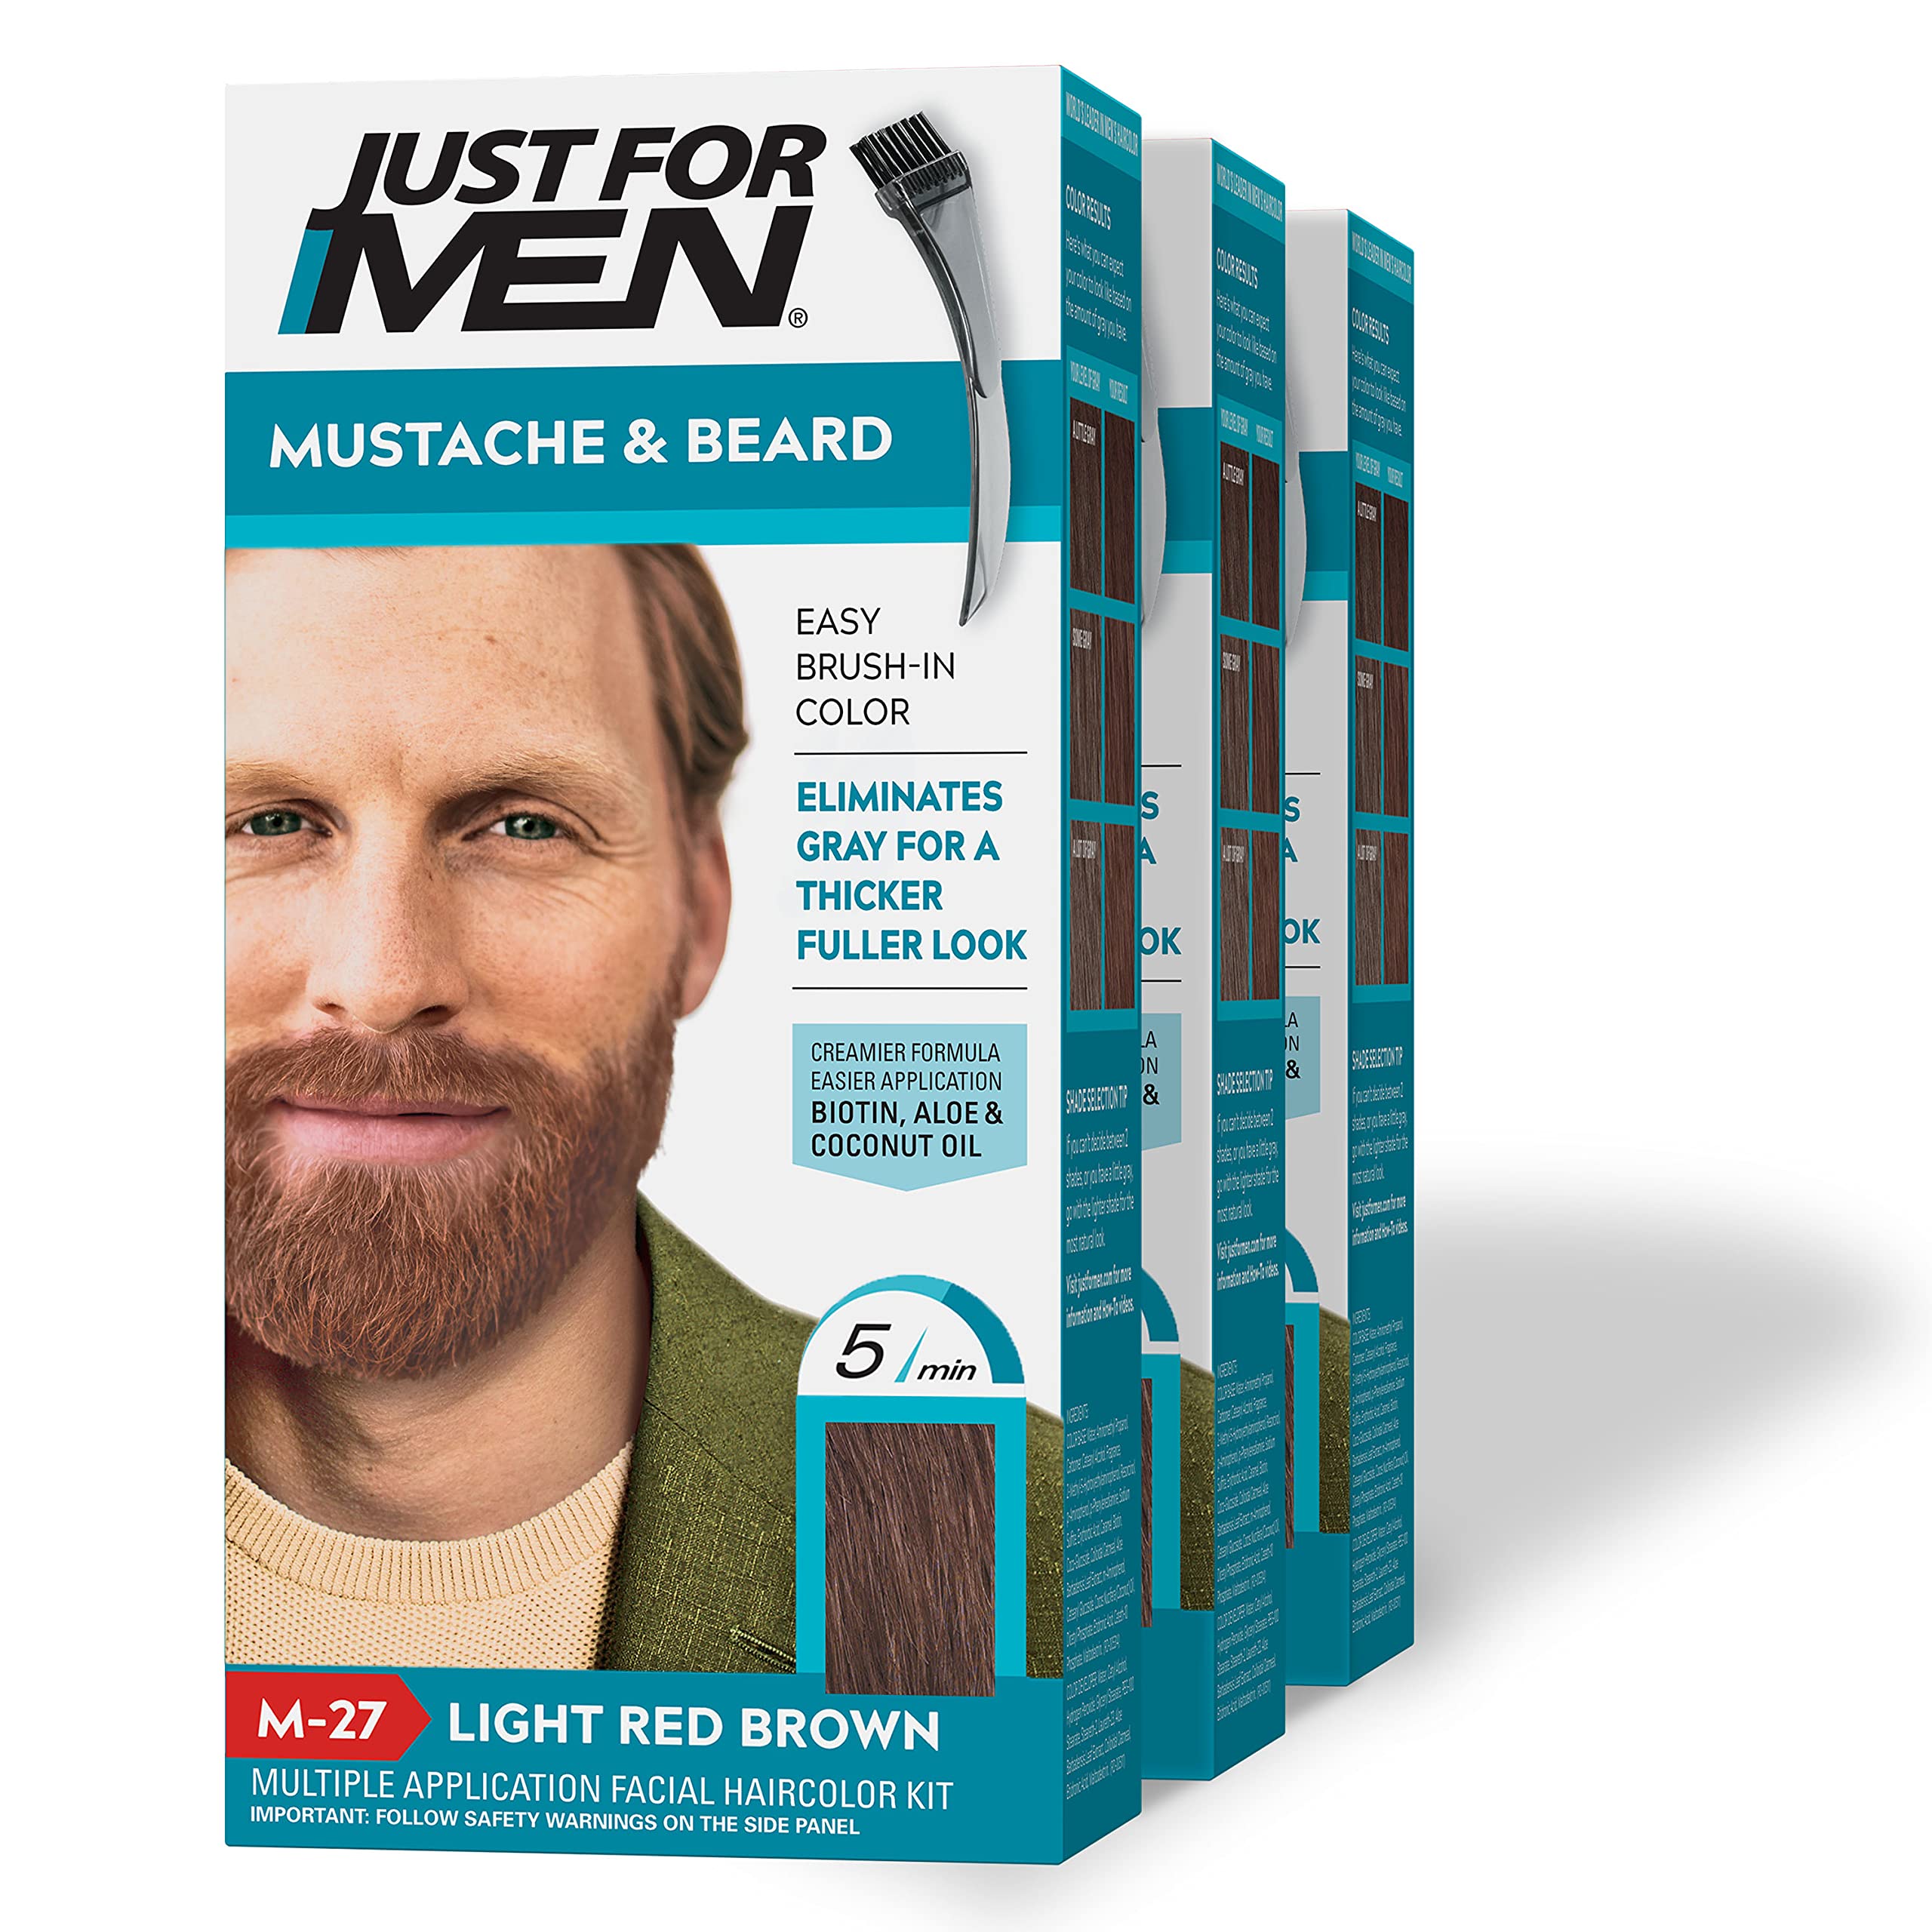 Just For Men Mustache & Beard, Beard Dye for Men with Brush Included for Easy Application, With Biotin Aloe and Coconut Oil for Healthy Facial Hair - Light Red Brown, M-27, Pack of 3